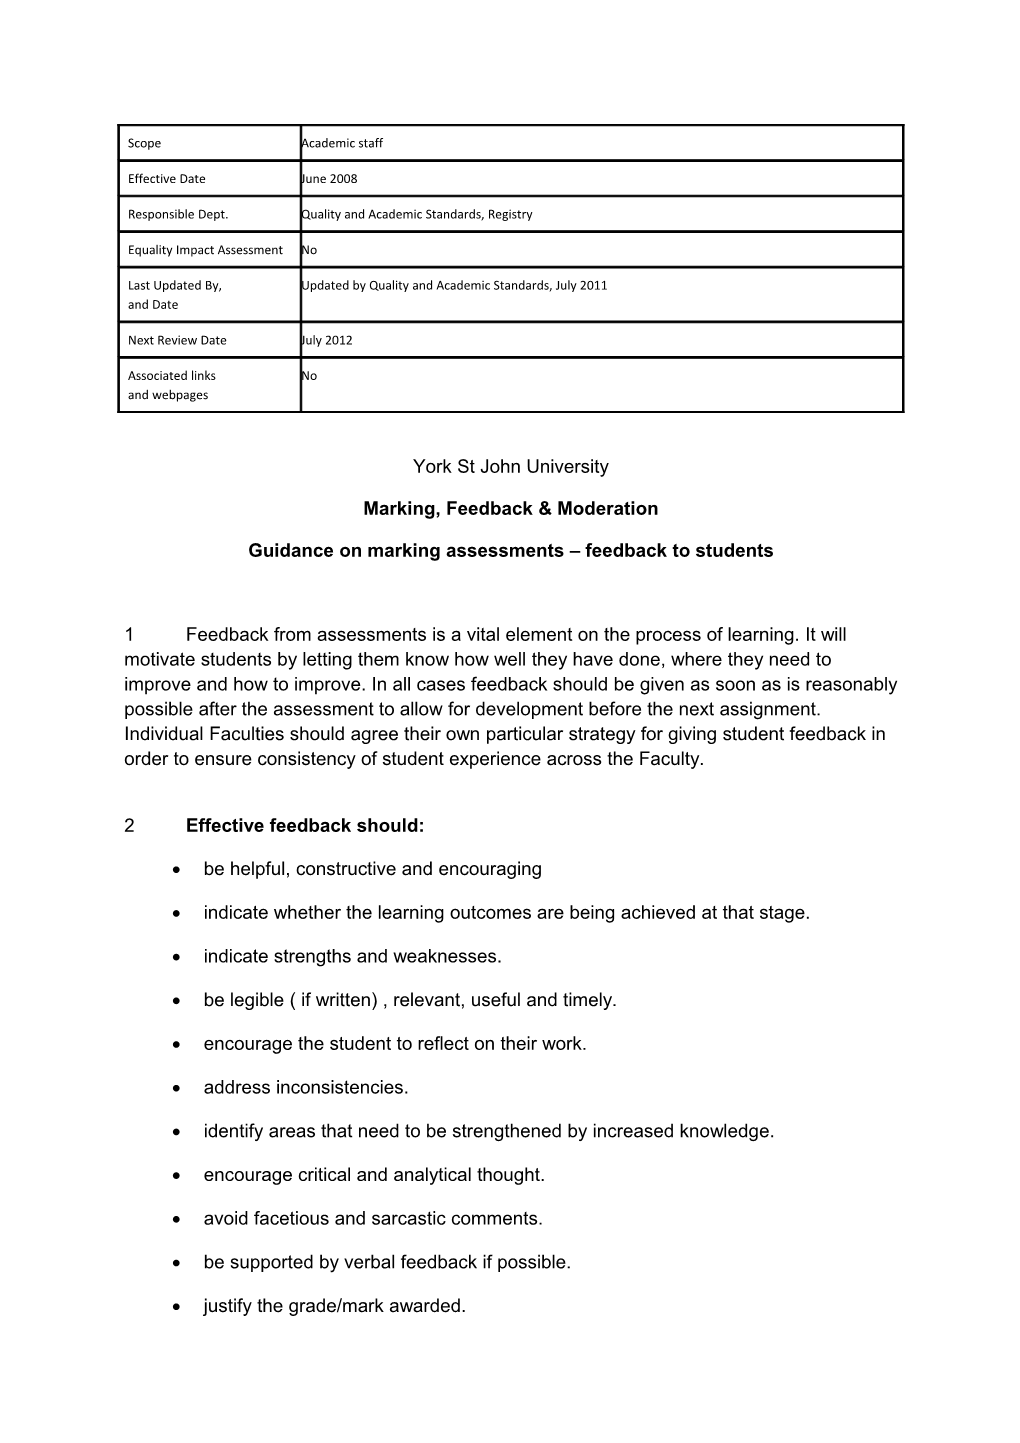 Guidance on Marking Assessments Feedback to Students